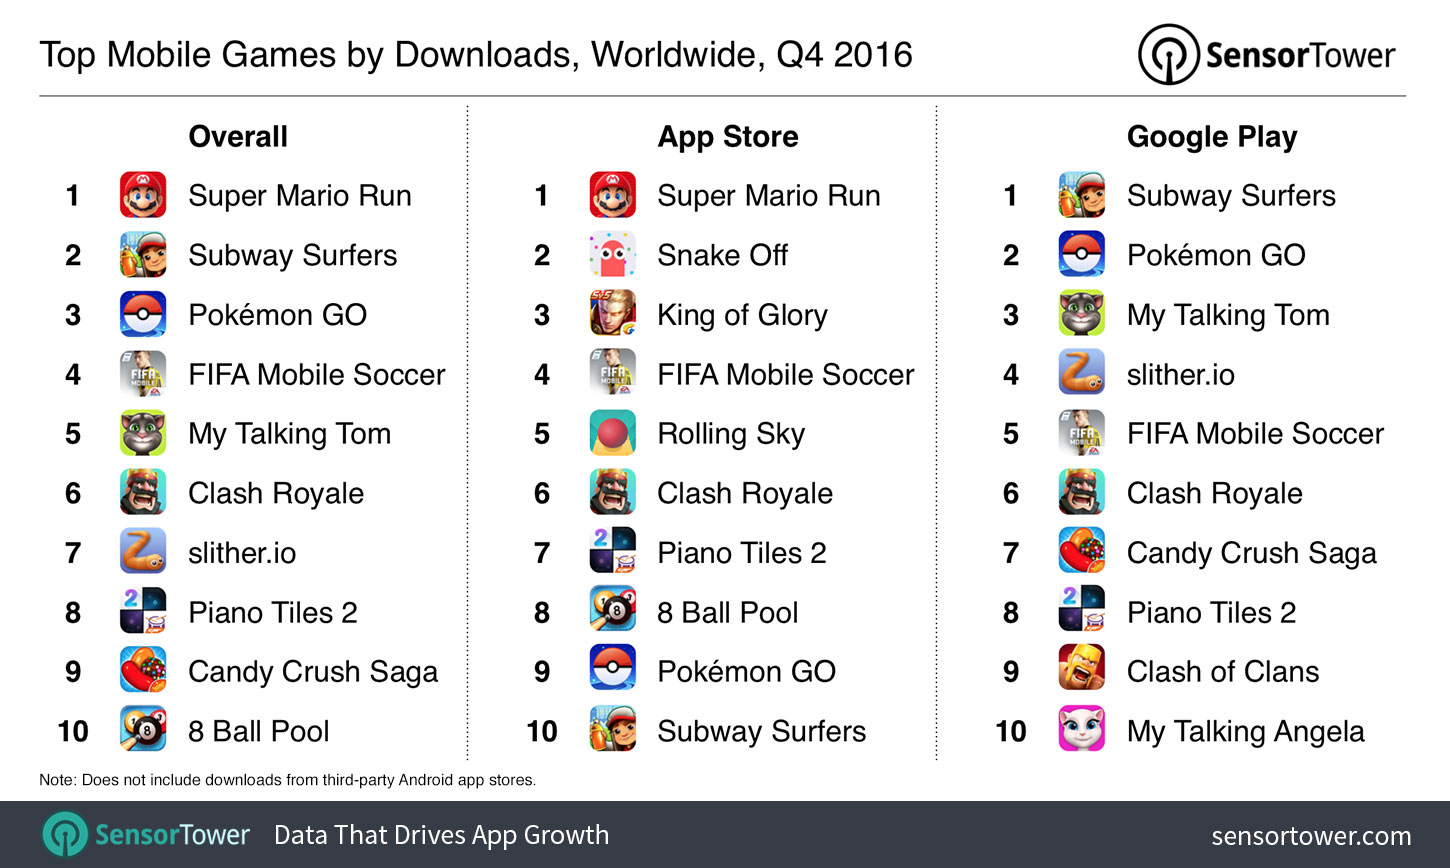 Q4 2016's Top Mobile Games by Downloads